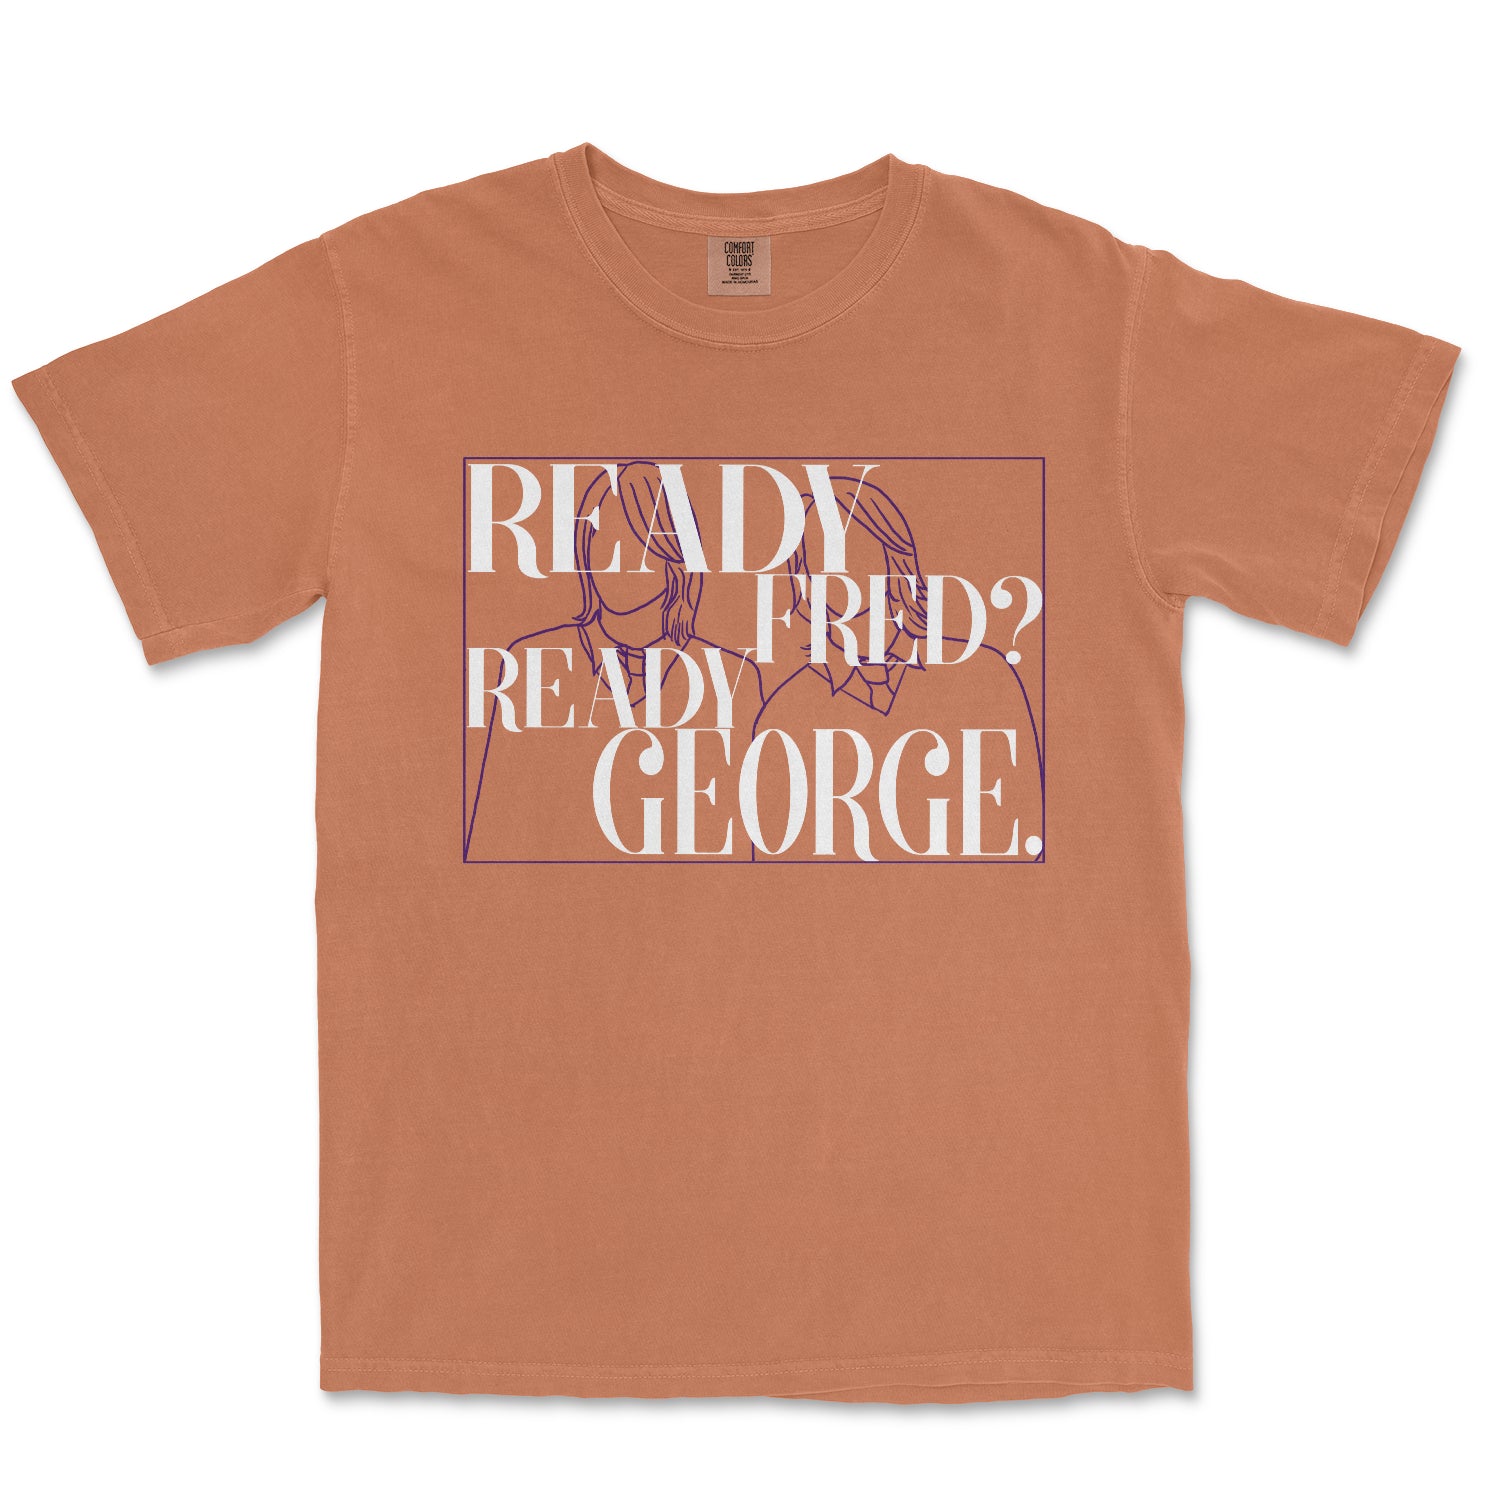 Ready Fred Ready George Garment Dyed Tee